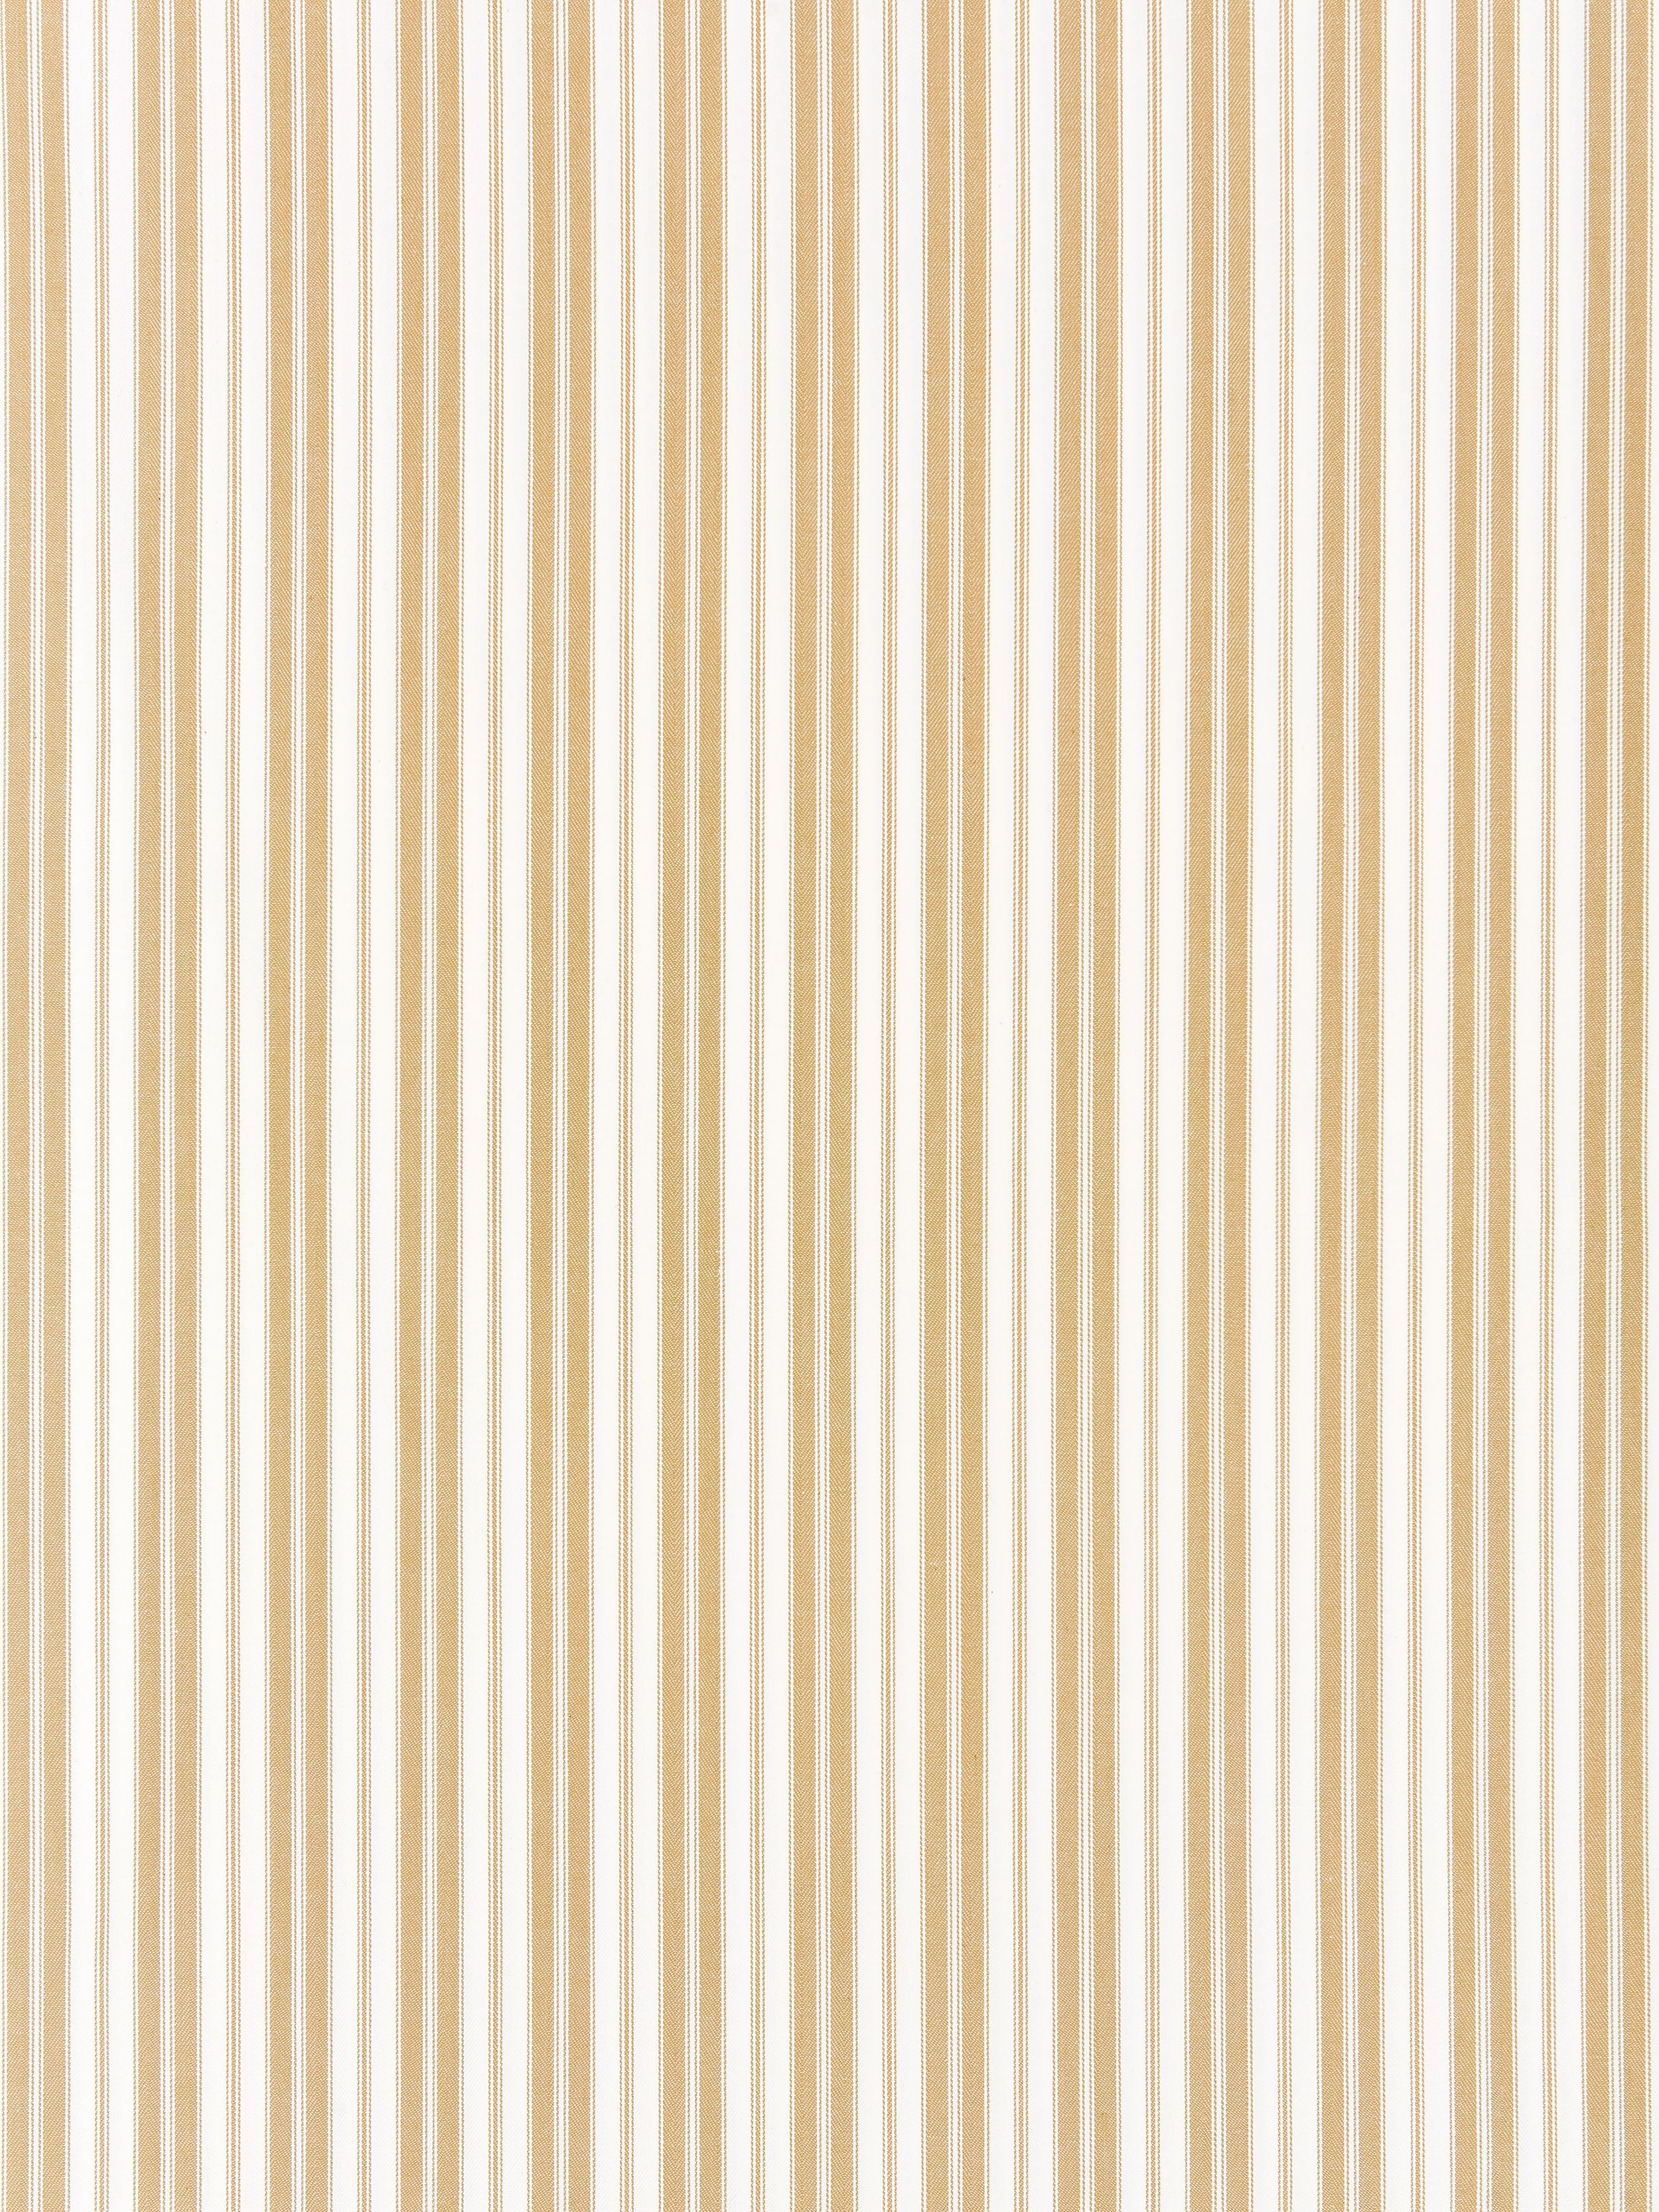 Devon Ticking Stripe fabric in camel color - pattern number SC 000227115 - by Scalamandre in the Scalamandre Fabrics Book 1 collection